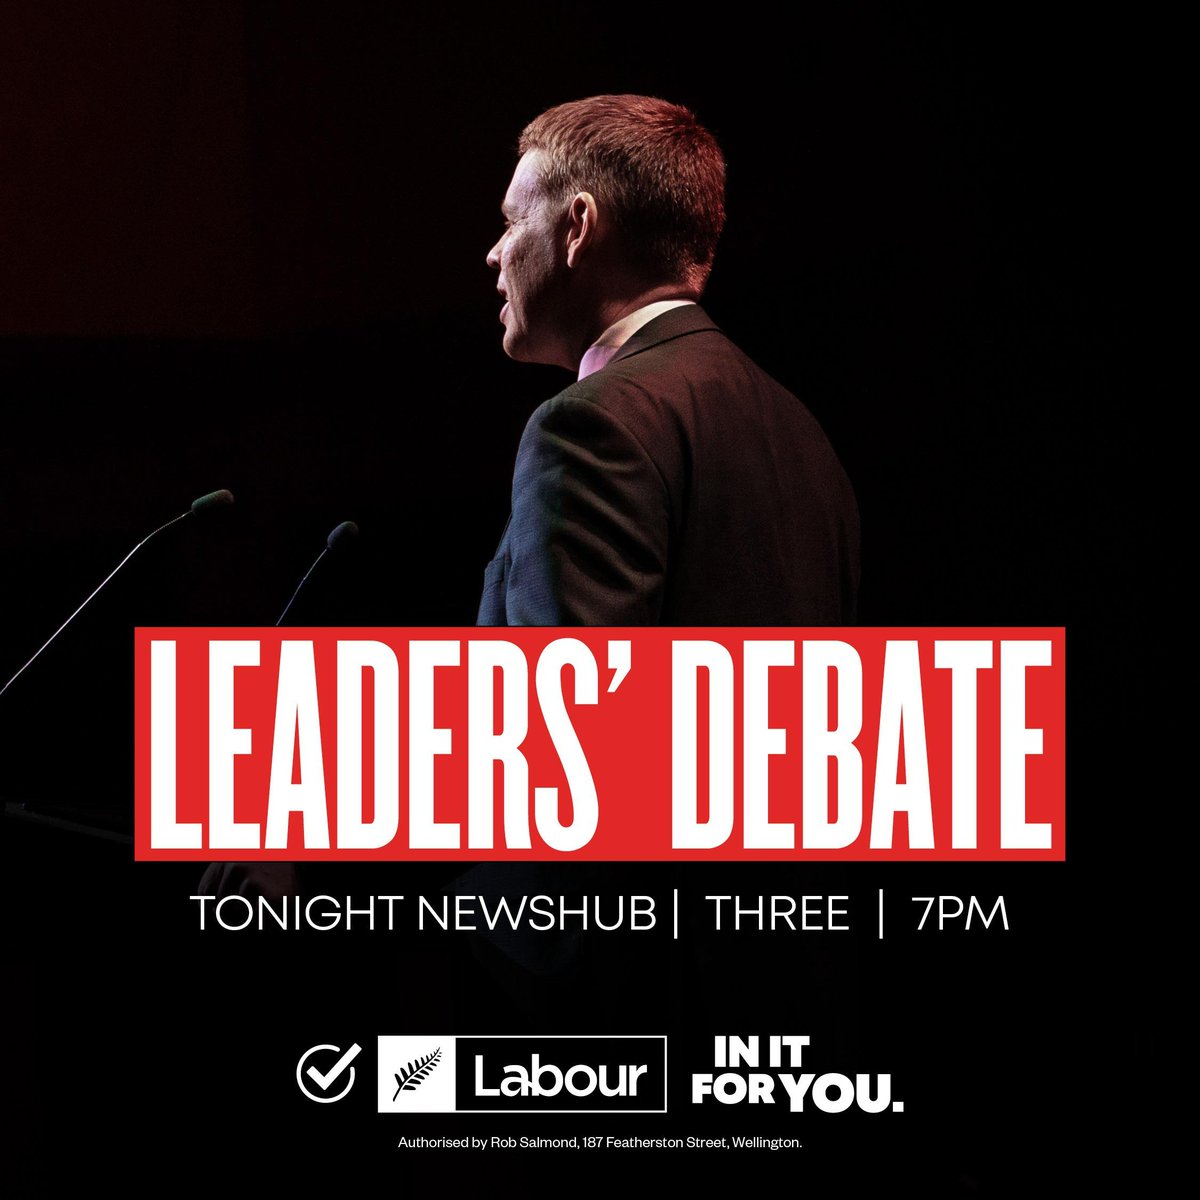 See you tonight at 7pm! #partyvotelabour #initforyou